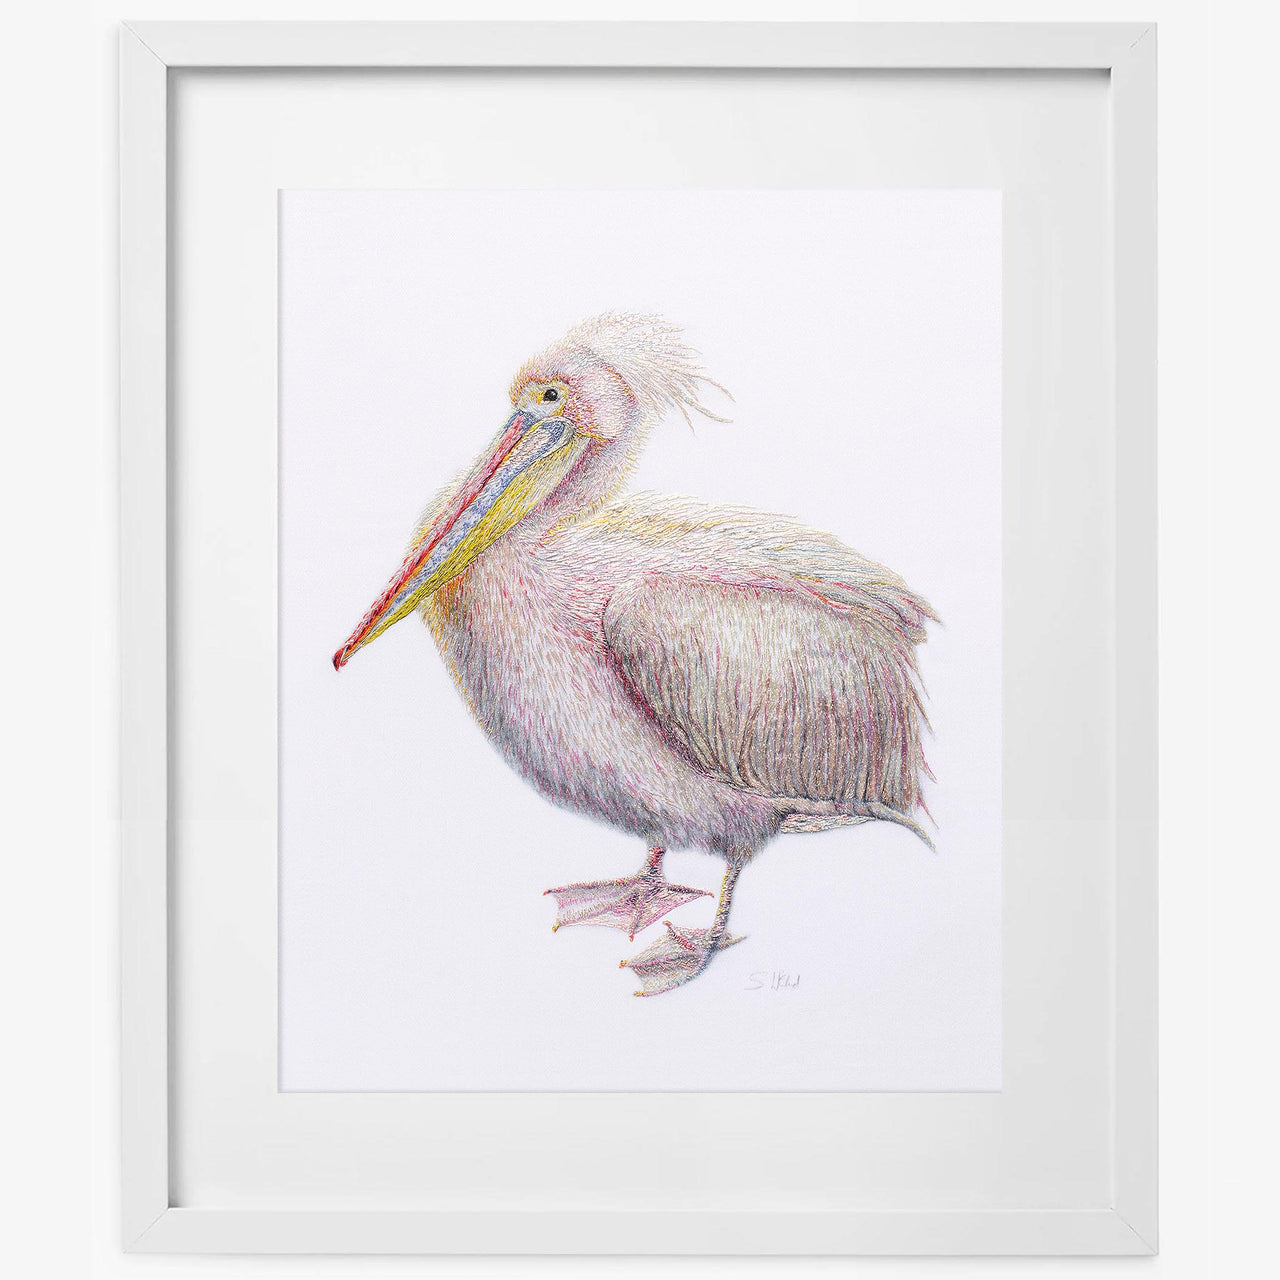 Pelican hand embroidered limited edition print in white frame